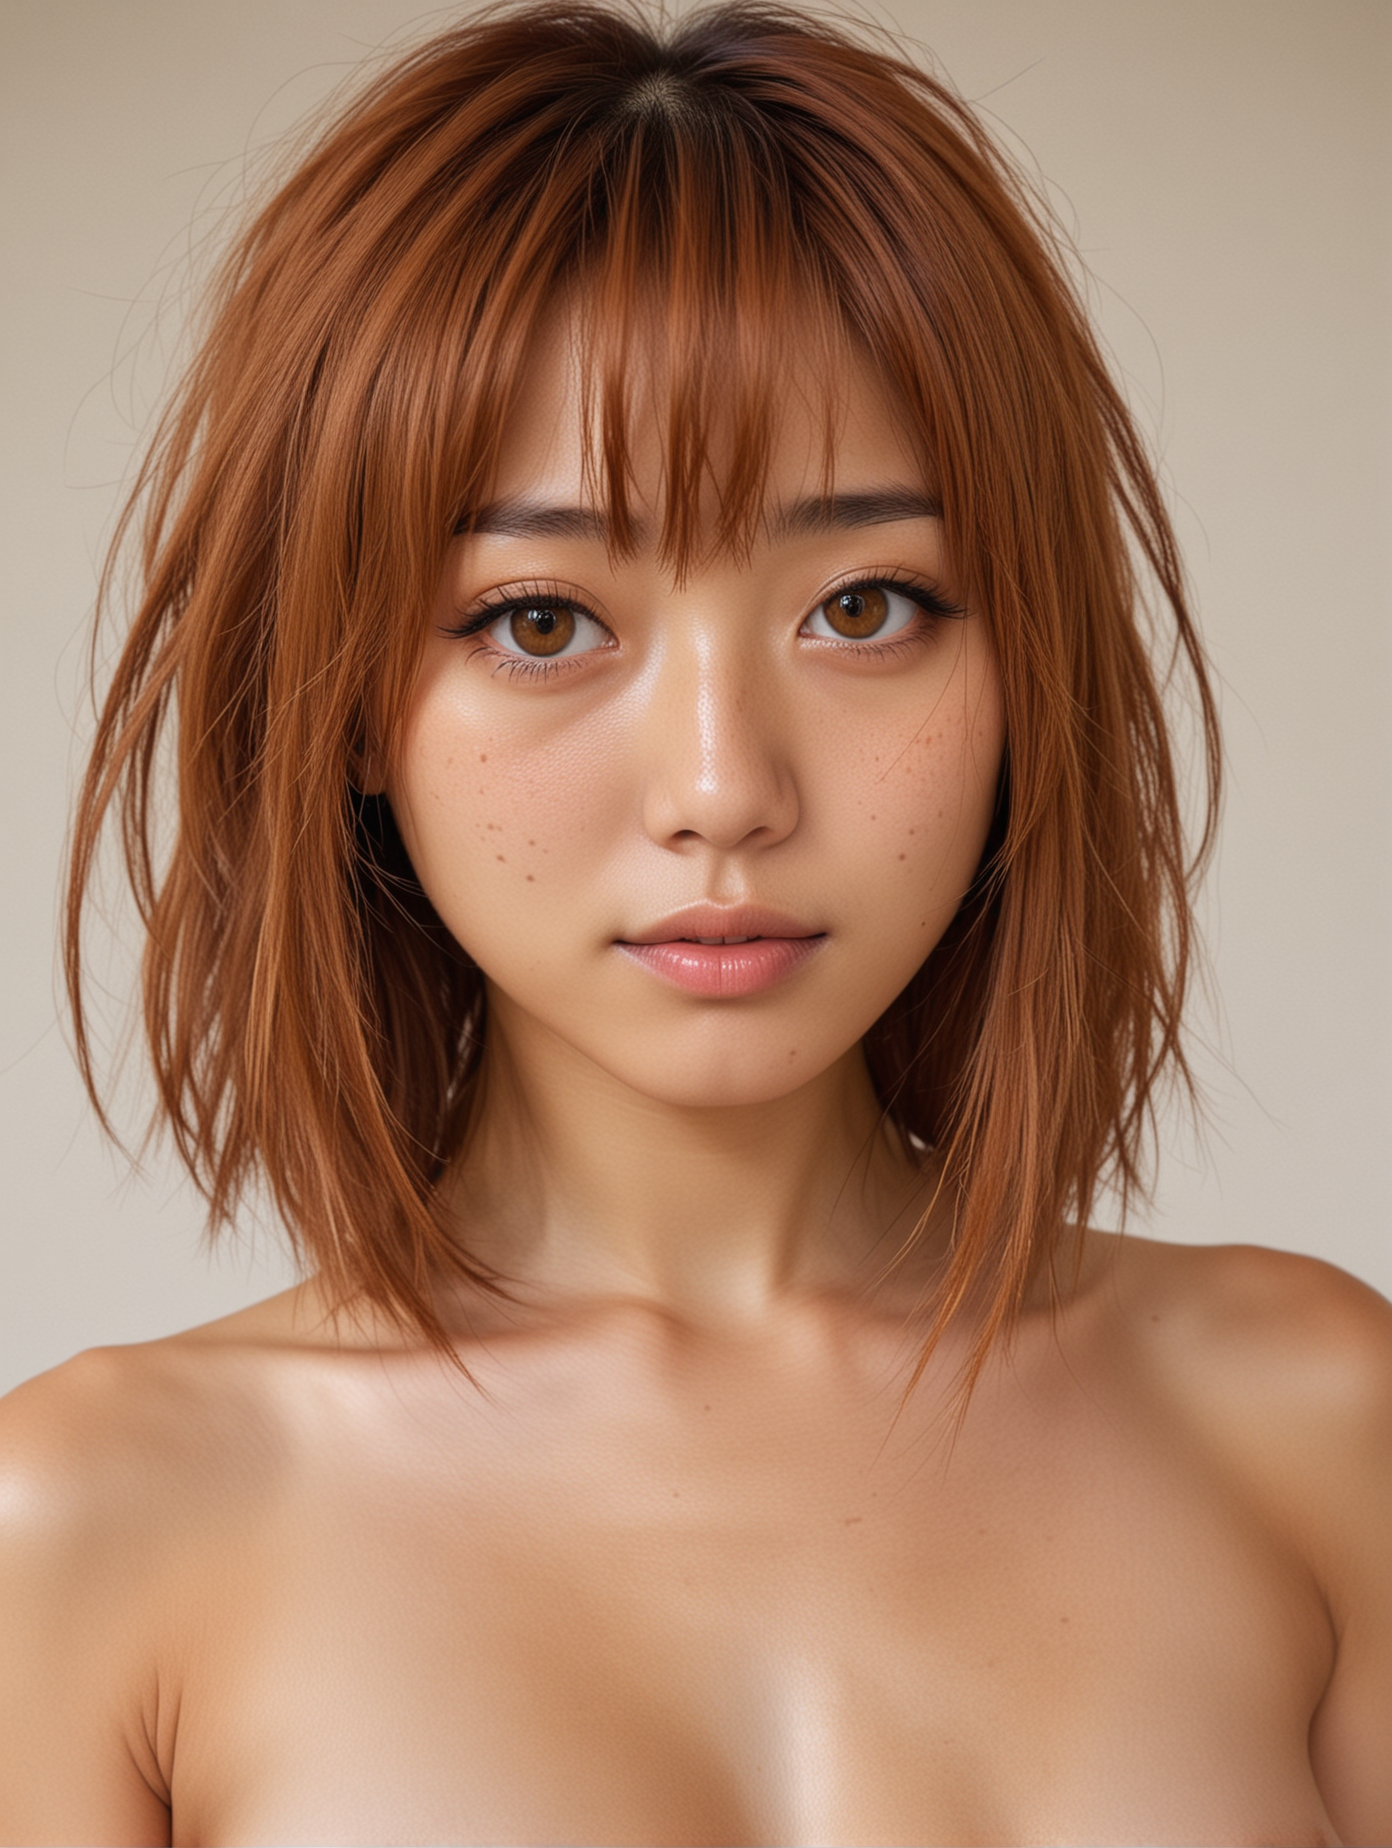 japanese girl with caramel-colored medium length hair, freckles and huge amber eyes. Nude topless